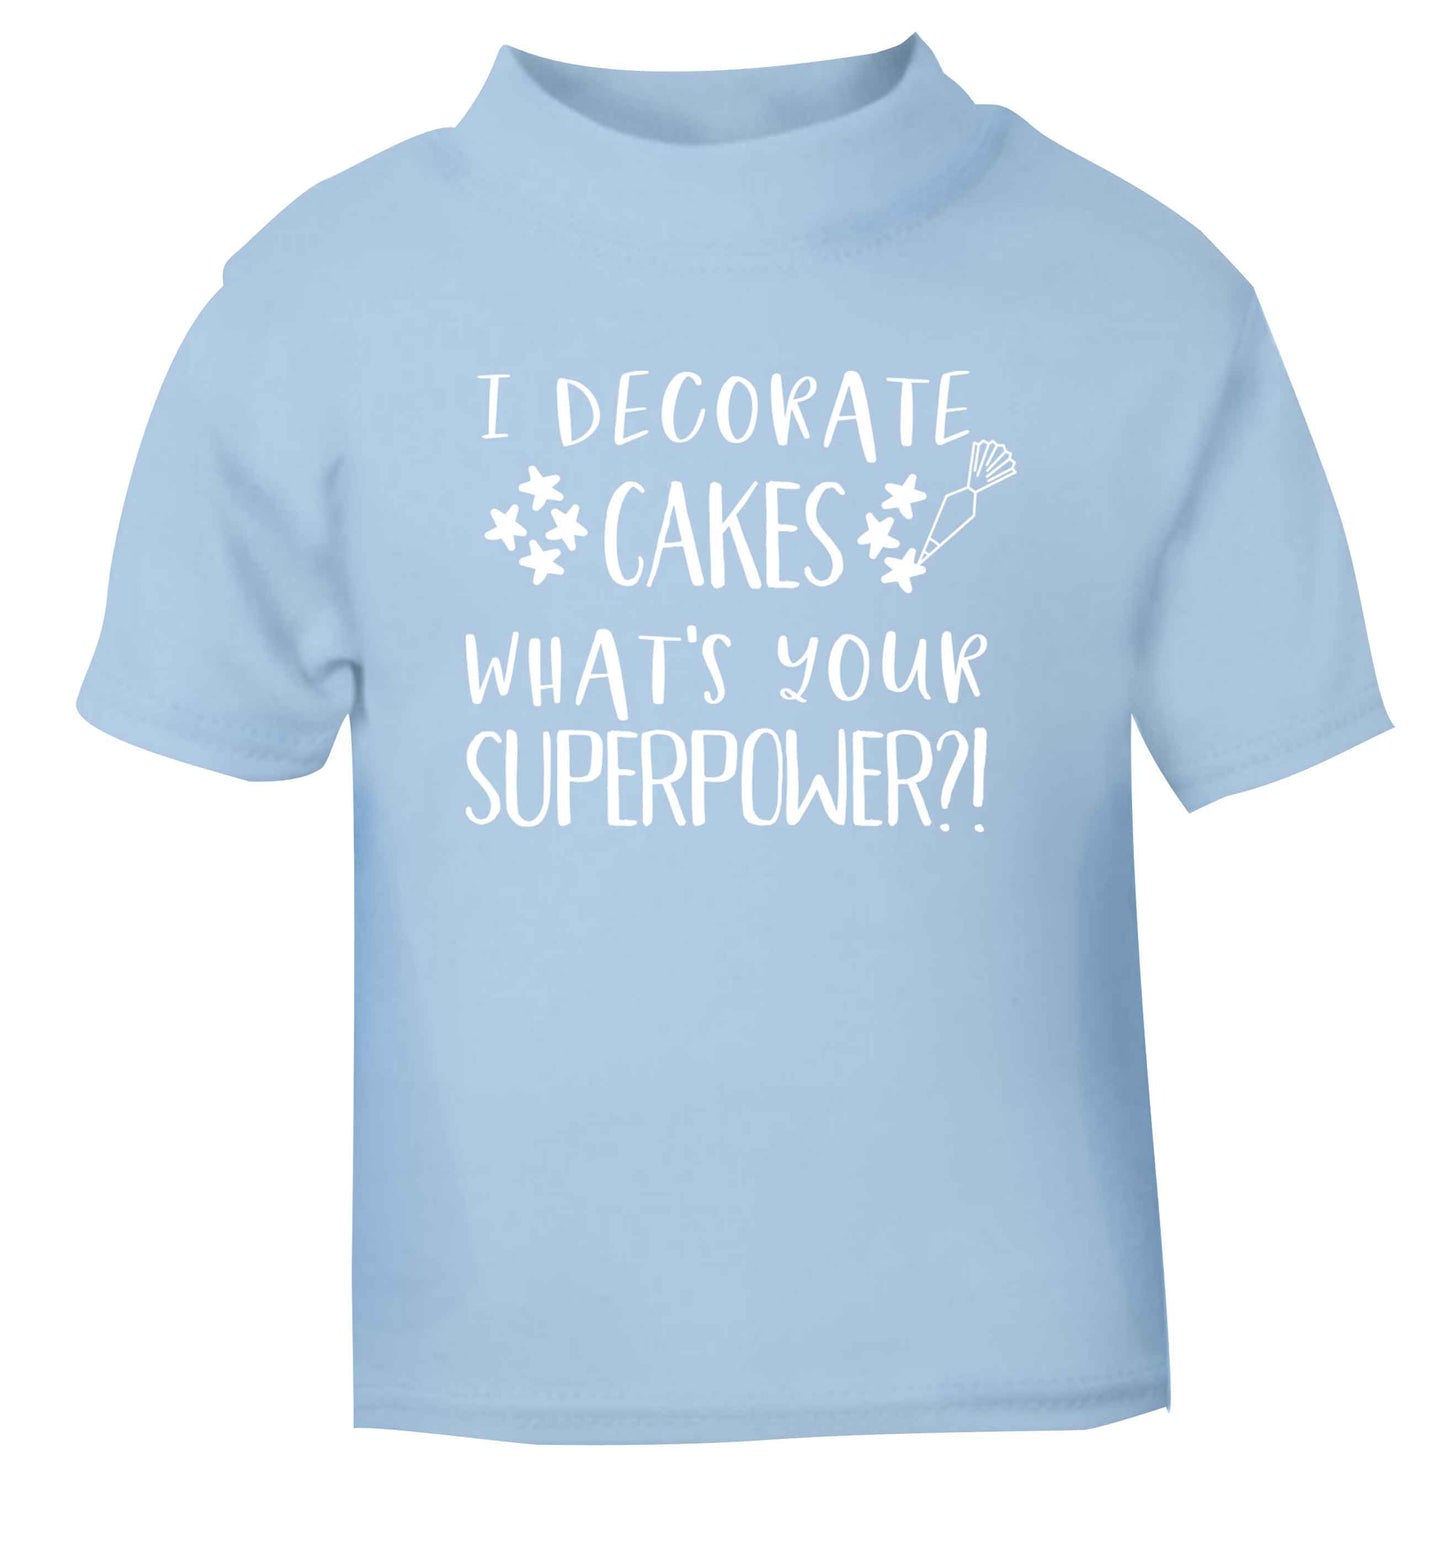 I decorate cakes what's your superpower?! light blue Baby Toddler Tshirt 2 Years